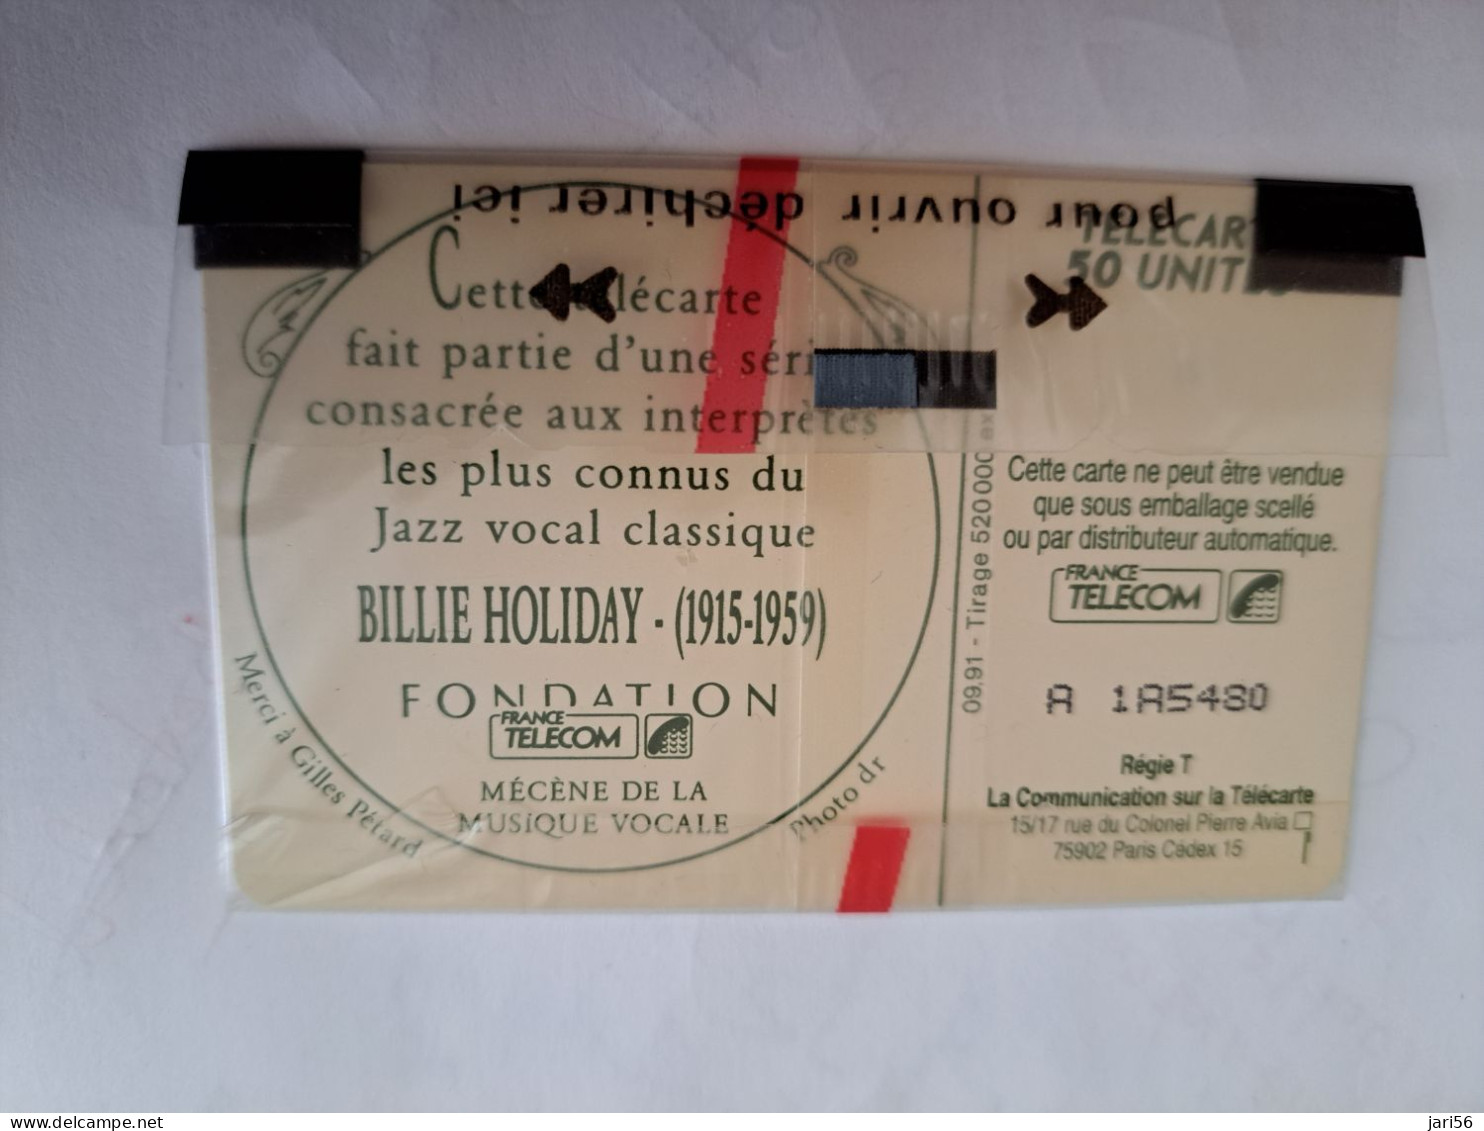 FRANCE/FRANKRIJK   CHIPCARD   50 UNITS / BILLIE HOLIDAY/   MINT IN WRAPPER     WITH CHIP     ** 14112** - Prepaid: Mobicartes